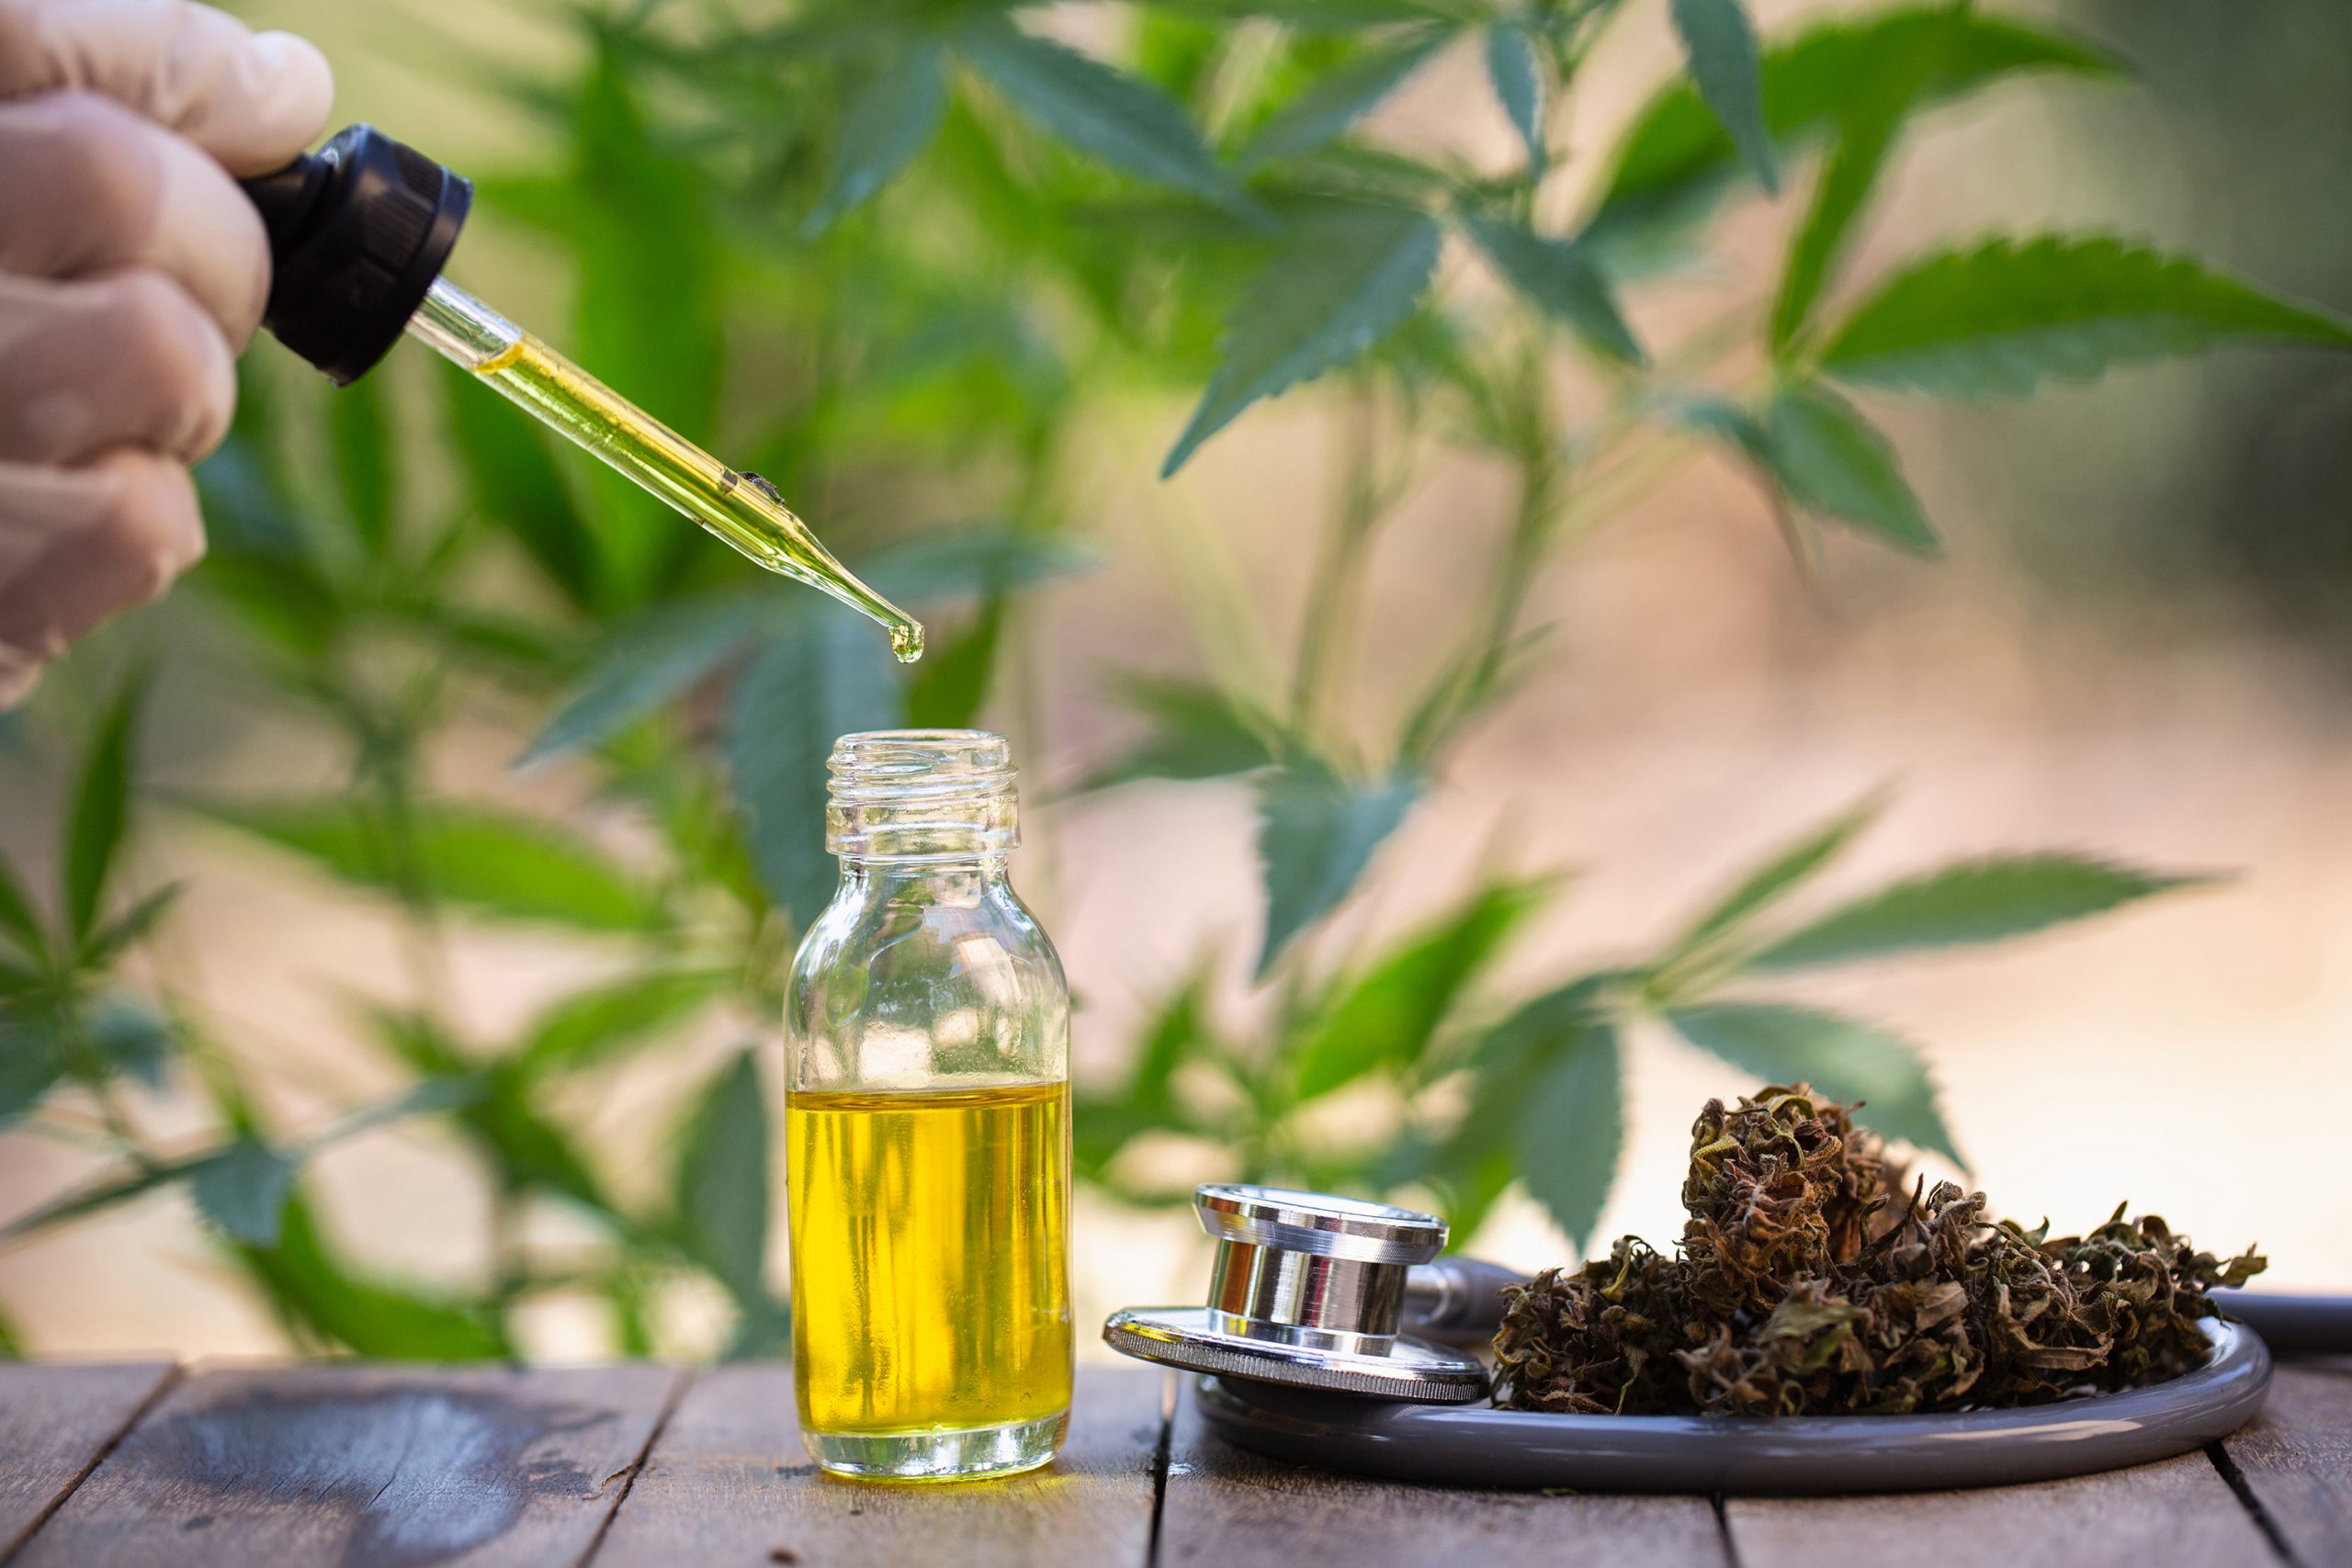 CBD DOSAGE GUIDE: HOW MUCH SHOULD YOU REALLY TAKE?